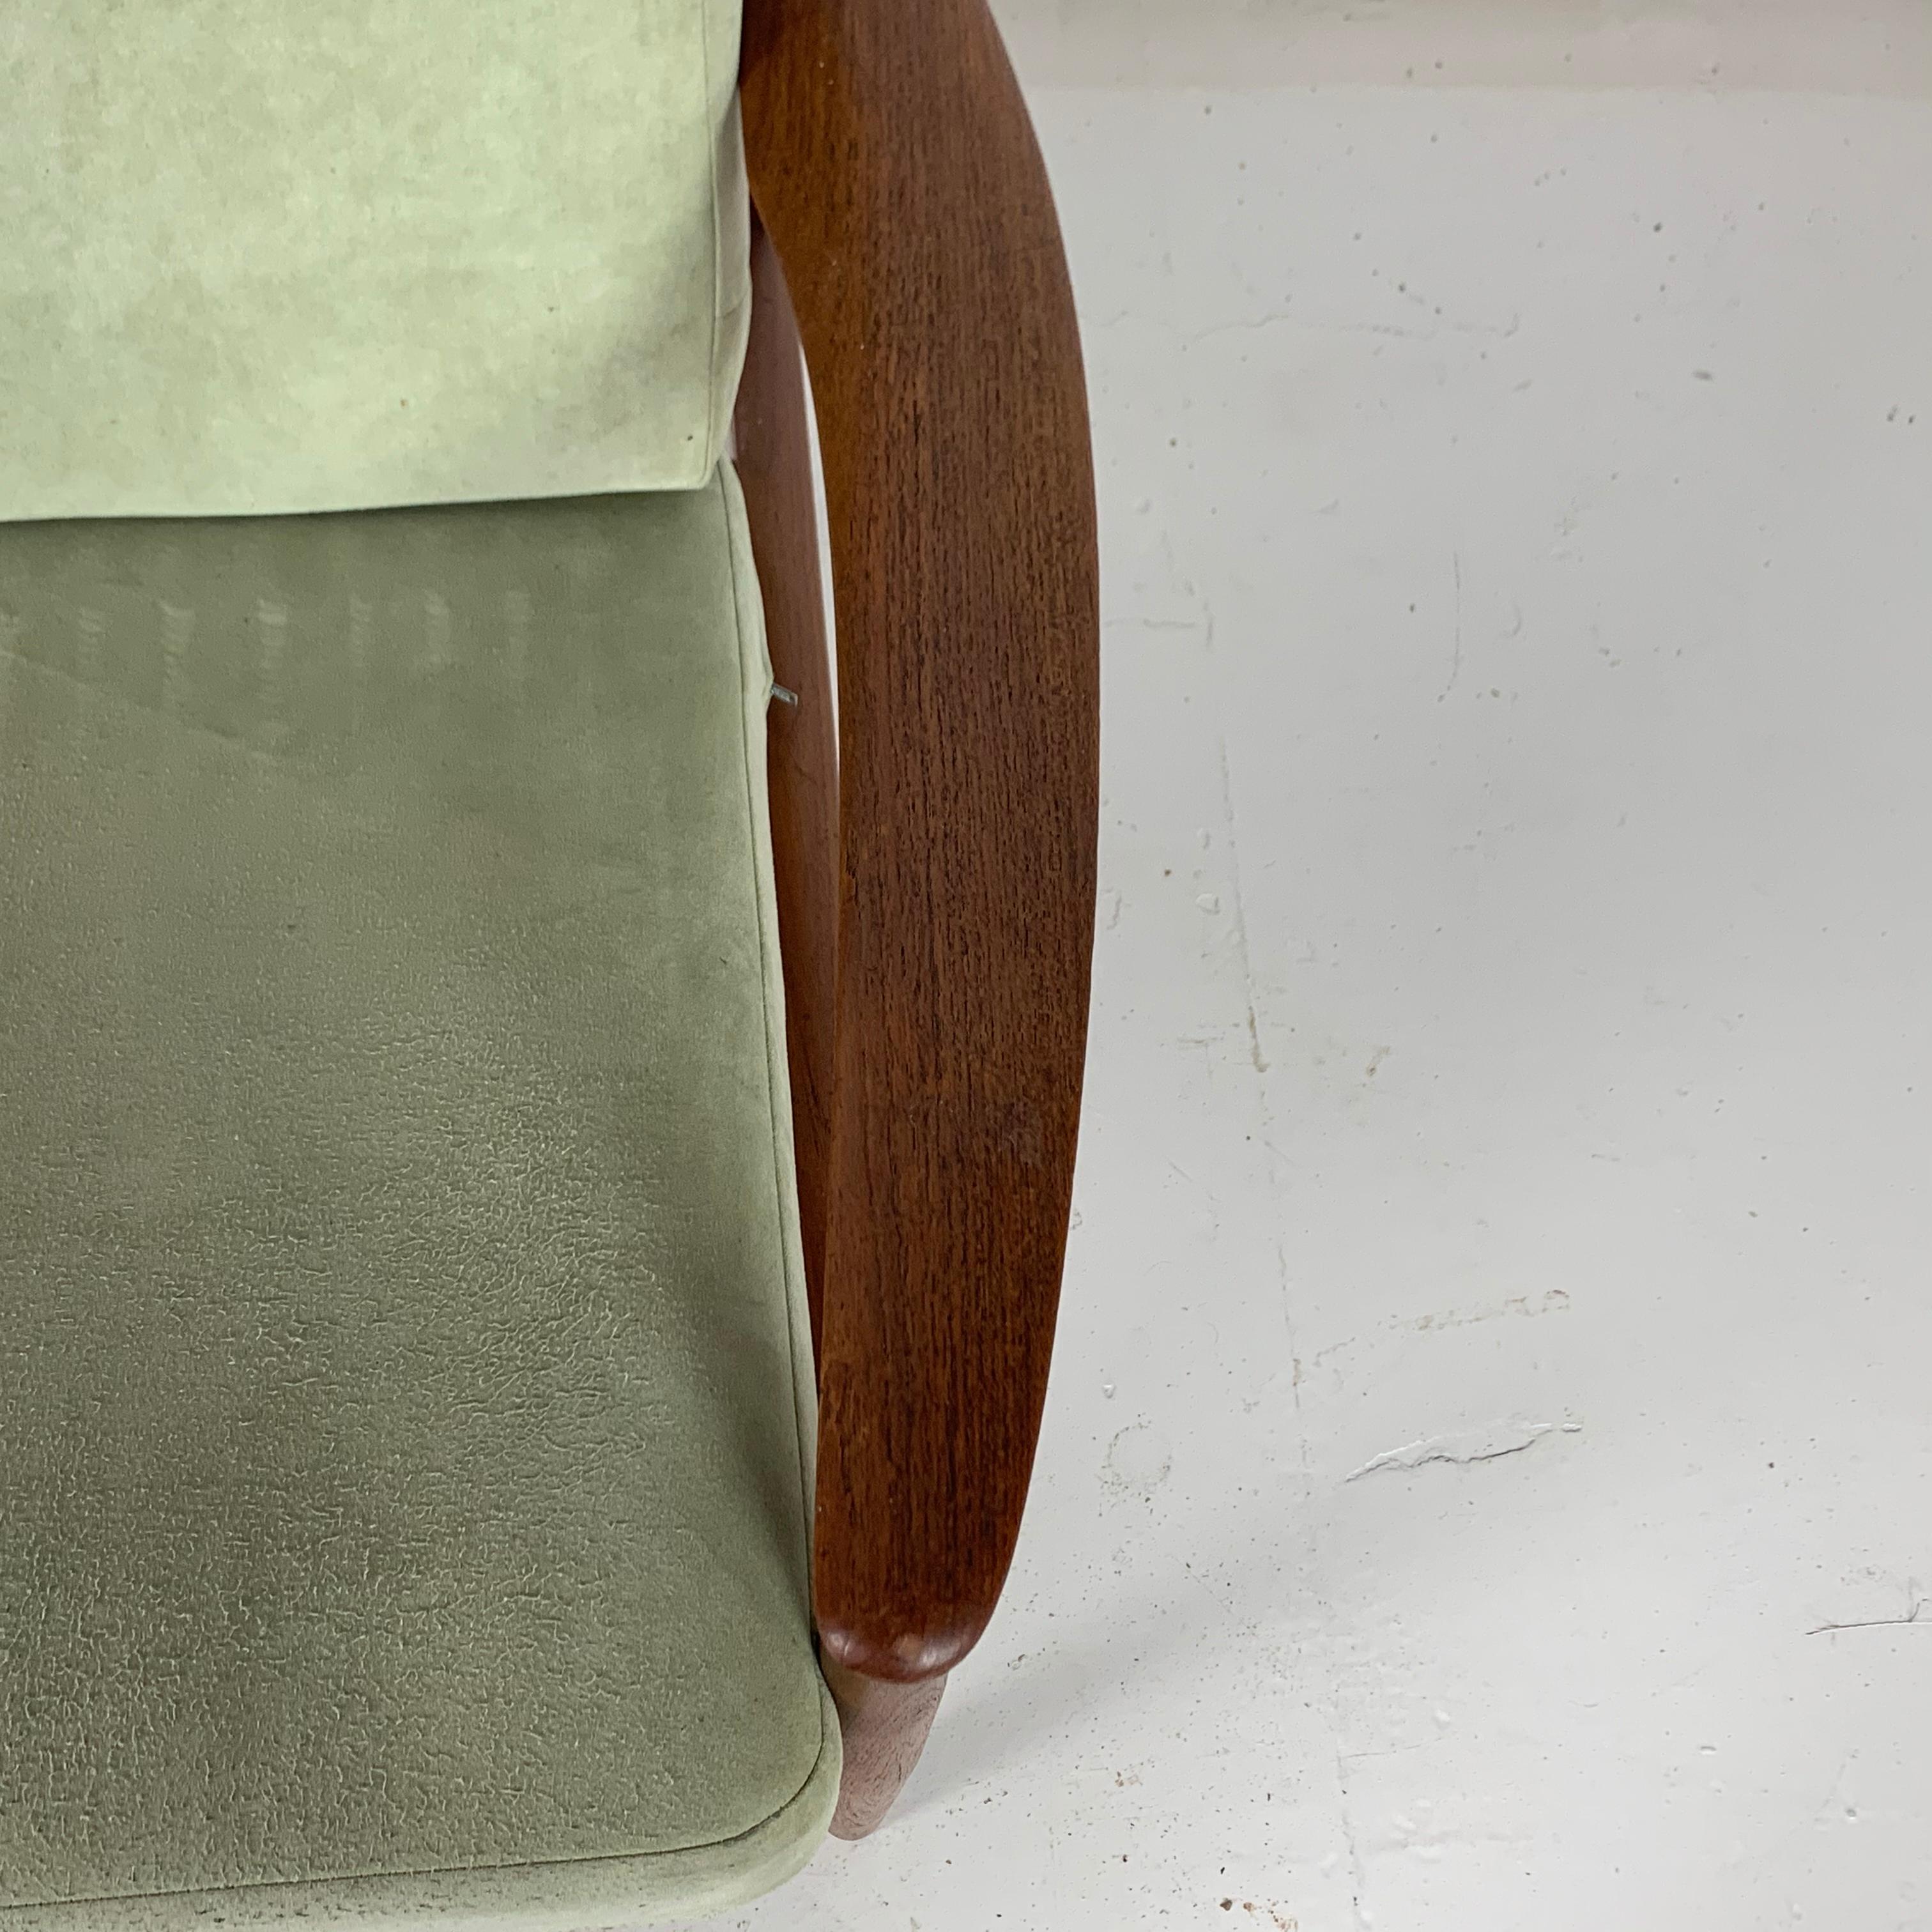 Lovely teak Grete Jalk for France & Son lounge chair made in the 1950s-1960s, with spring-loaded cushions upholstered in green suede-feel fabric. Beautiful sculpted arms.

Approximate dimensions: Height 70.5cm, depth 74cm, width 76cm.